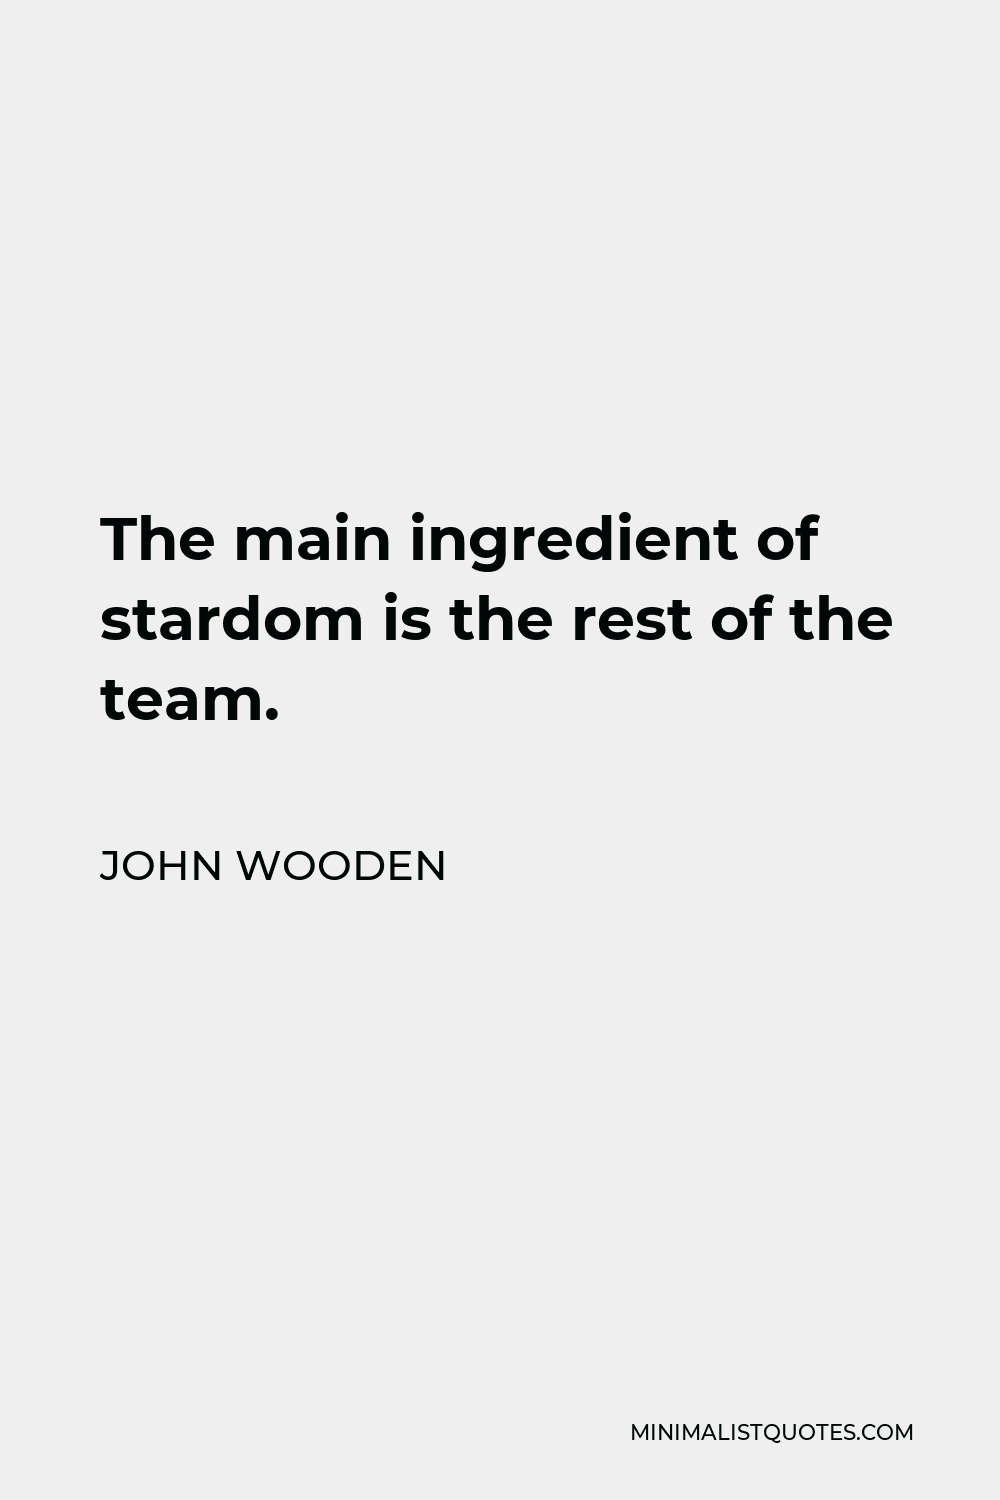 John Wooden Quote: The main ingredient of stardom is the rest of the team.